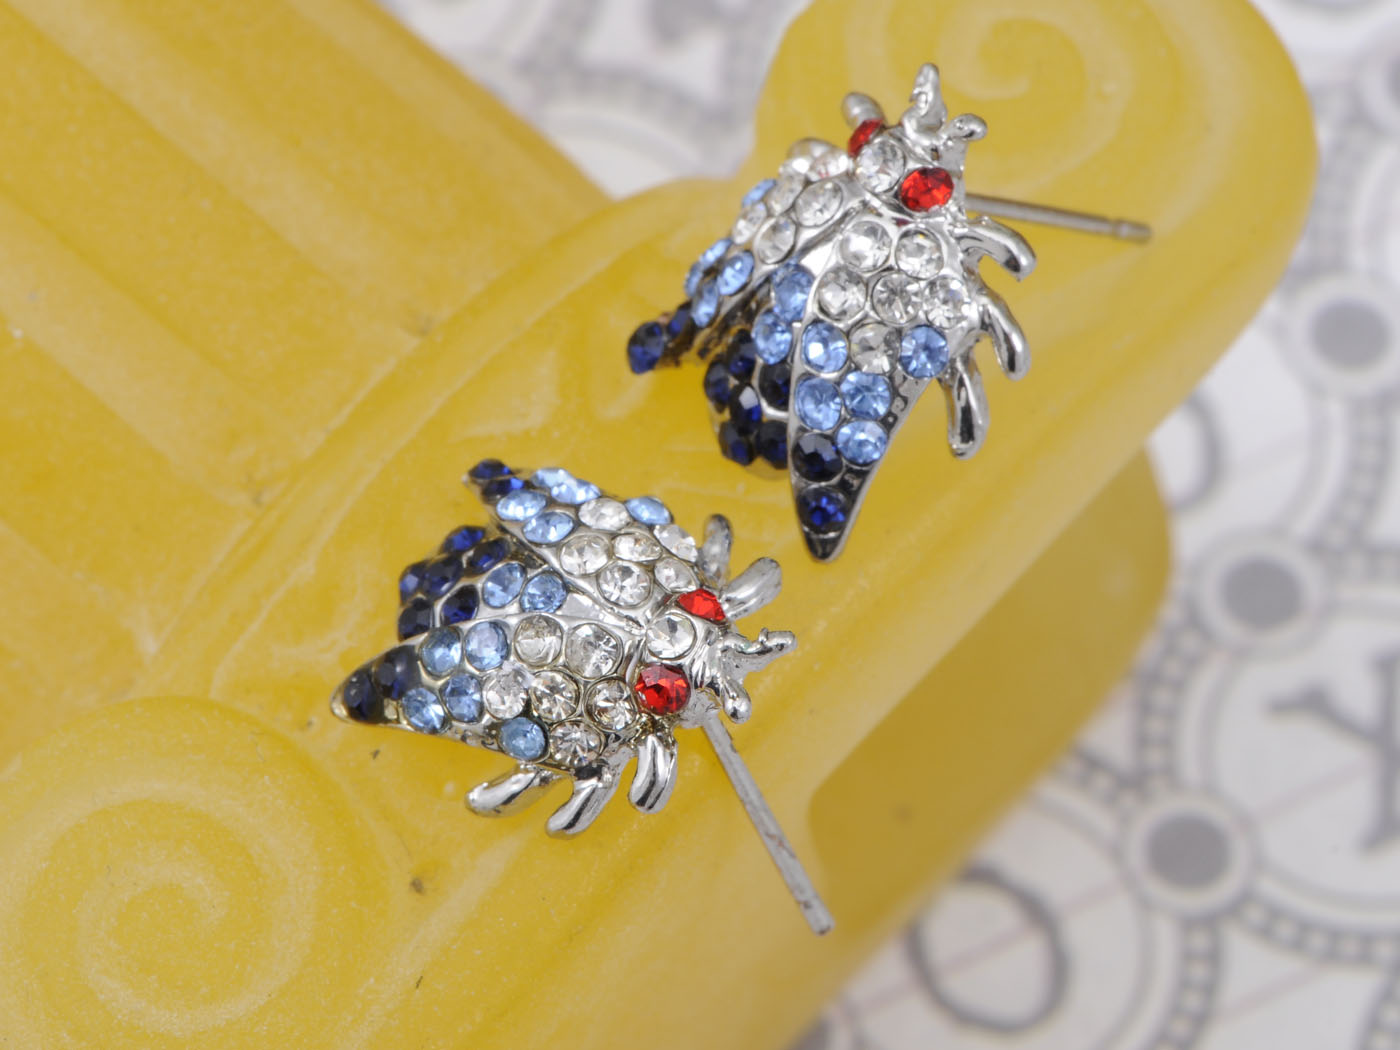 Insect House Fly Beetle Creature Element Earrings